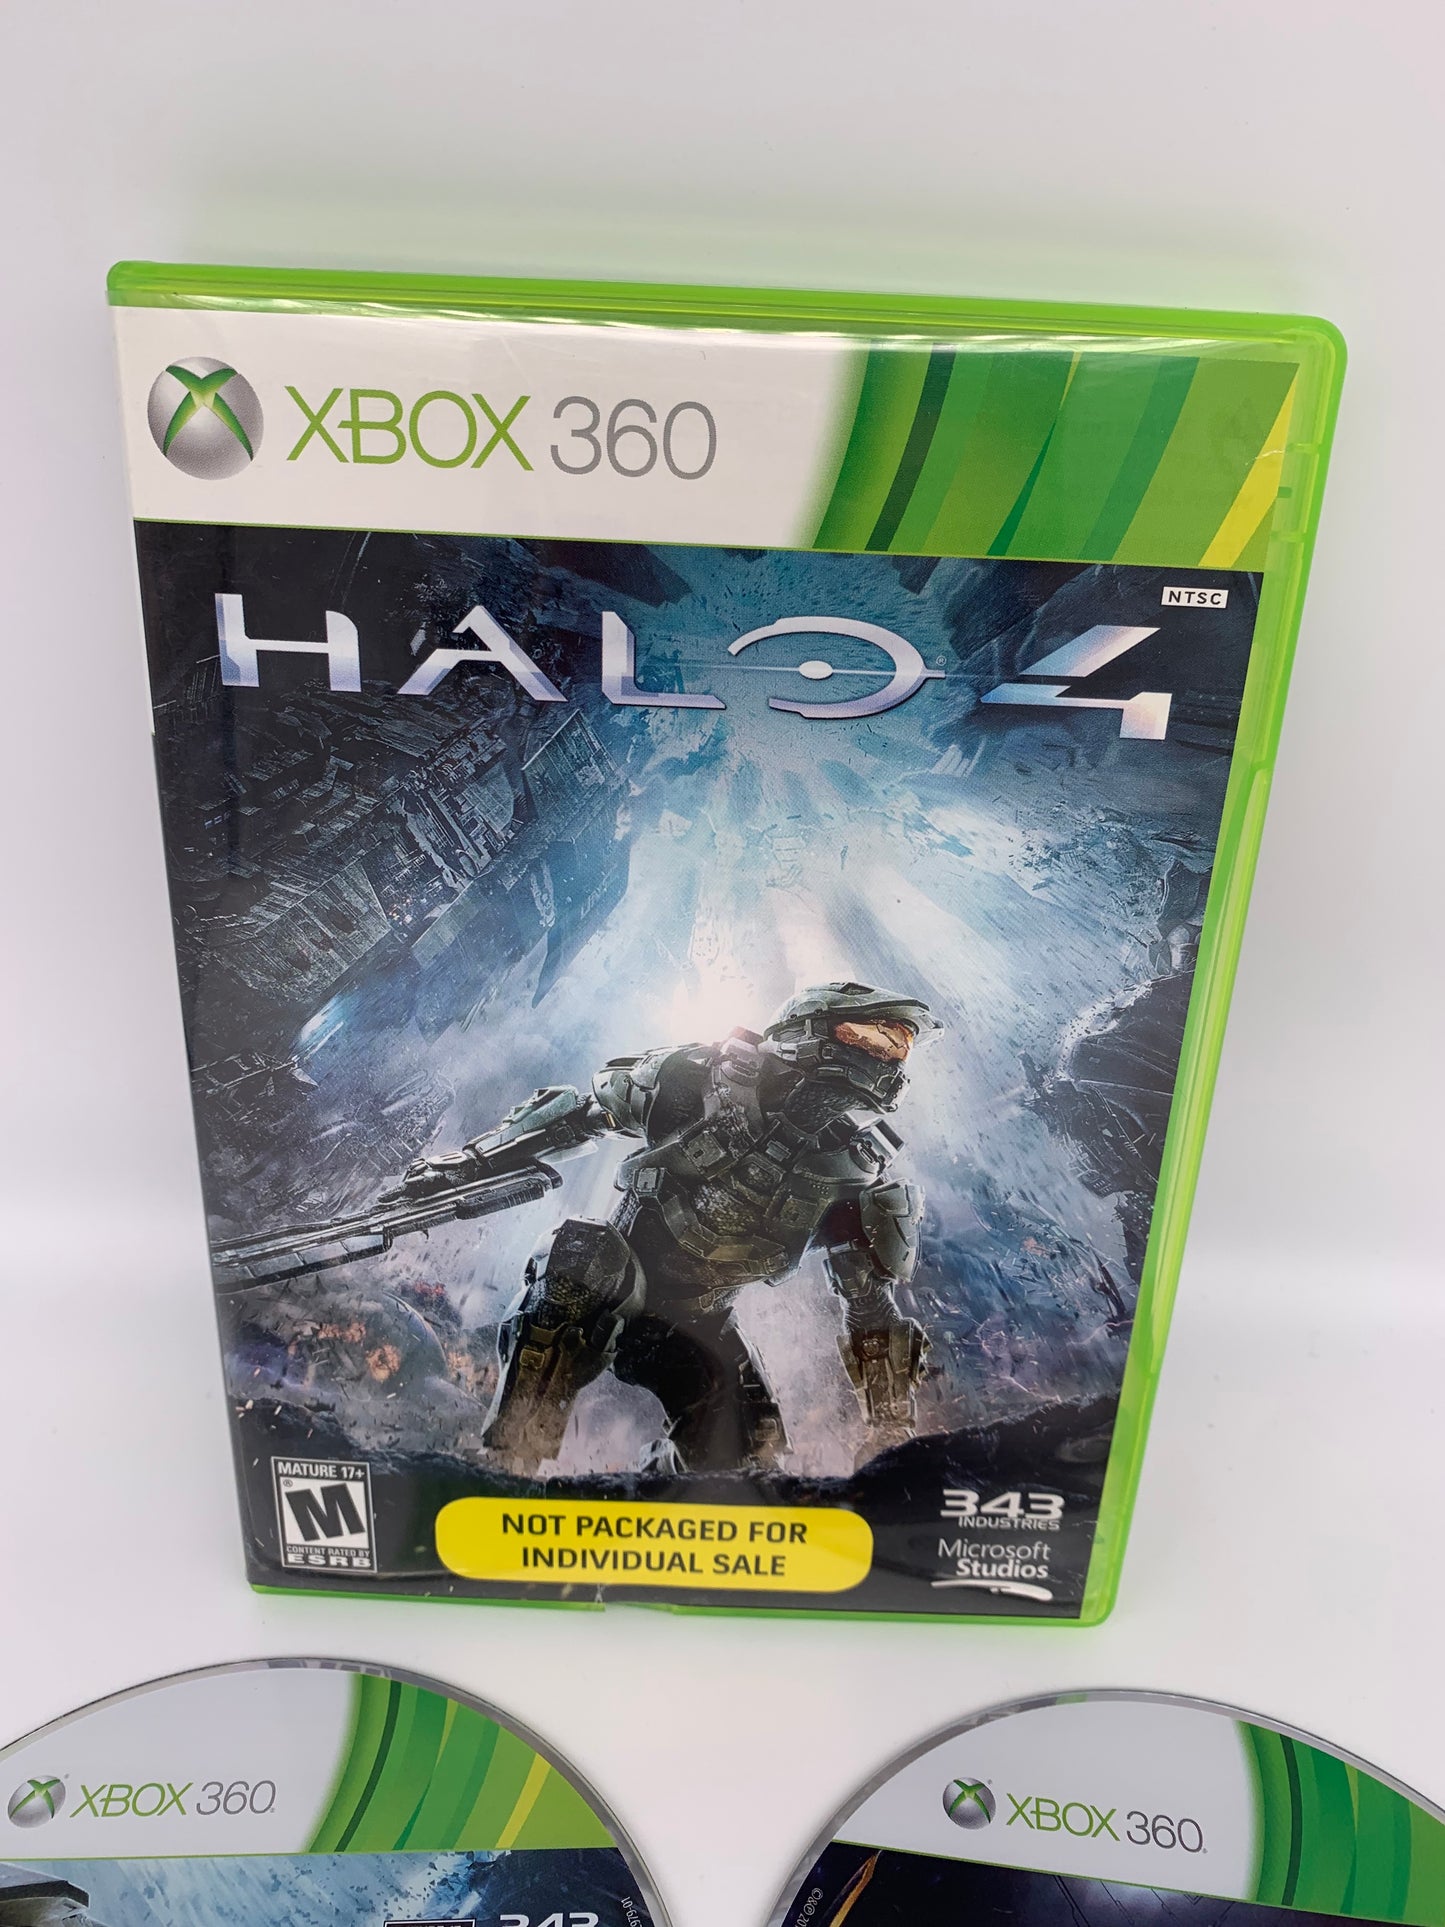 MiCROSOFT XBOX 360 | HALO 4 | NOT FOR RESALE